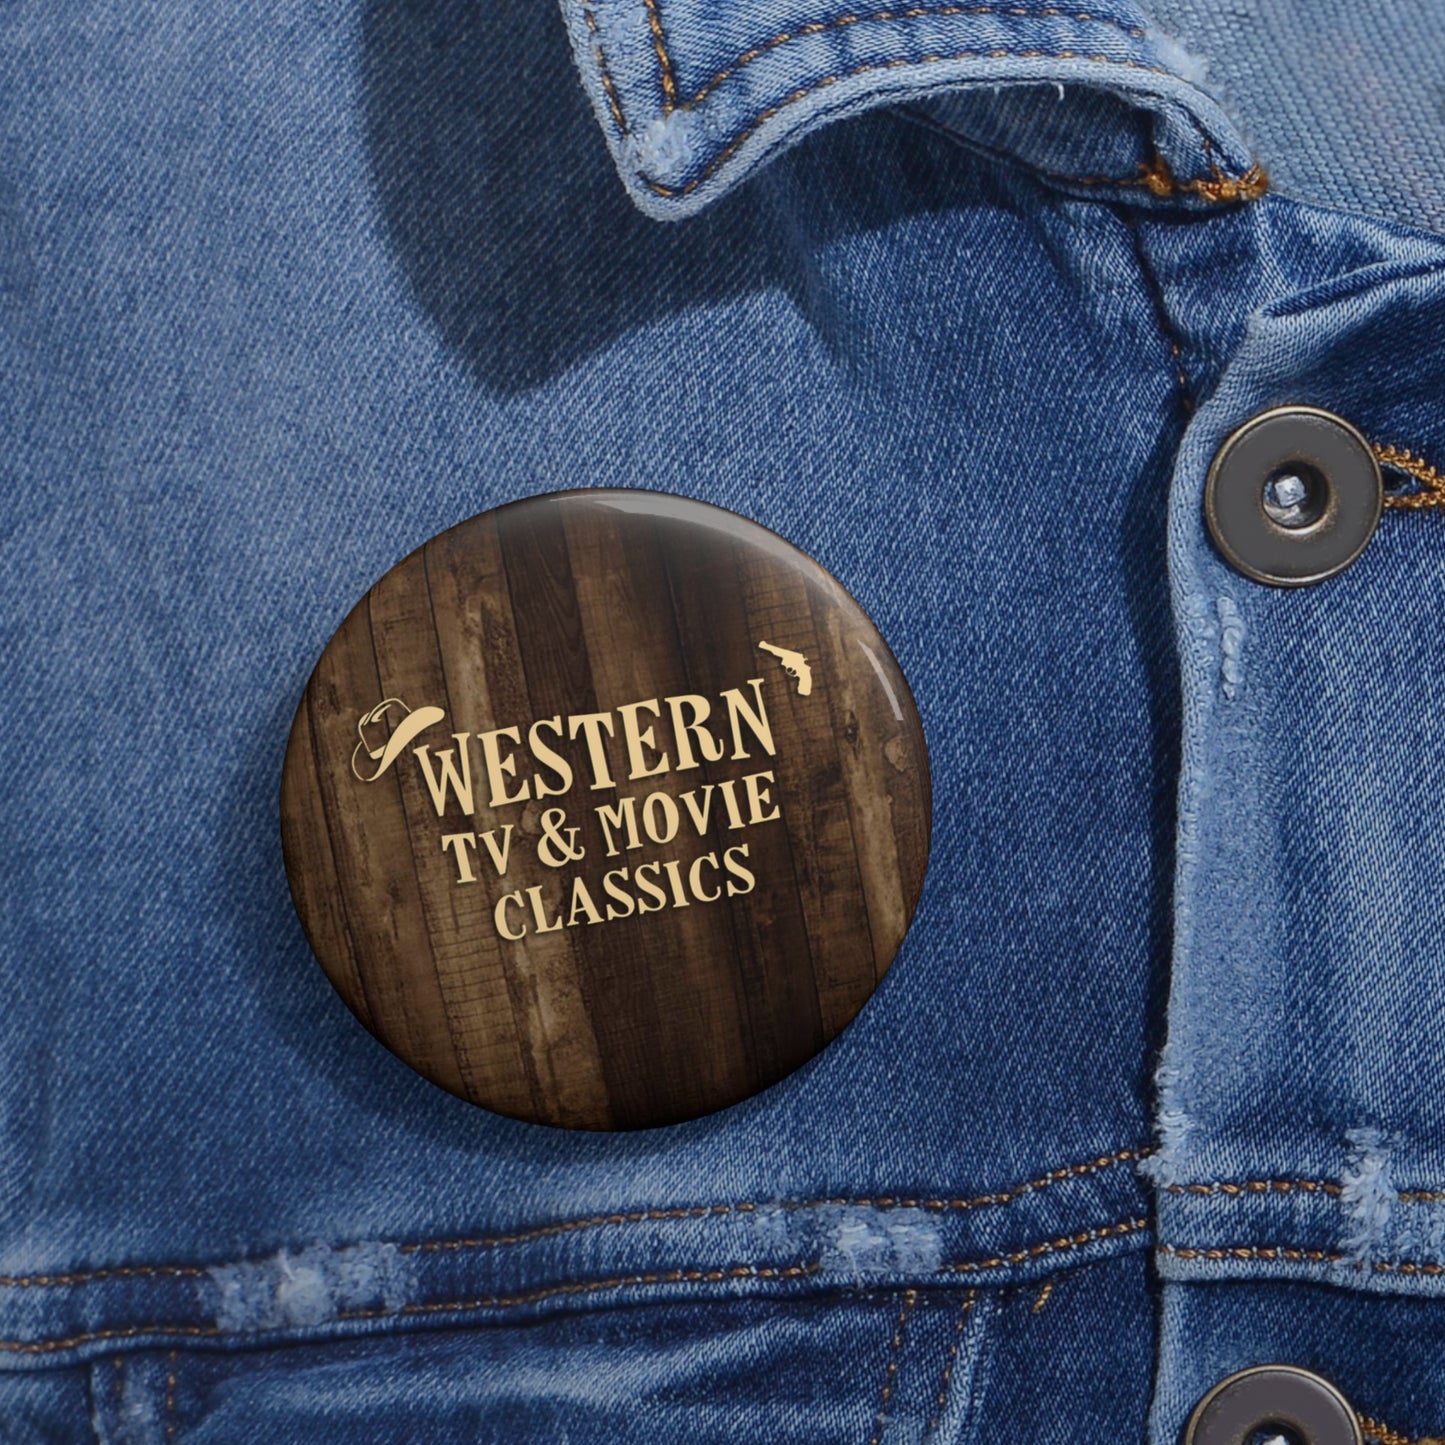 Western TV & Movie Classics Pin Buttons